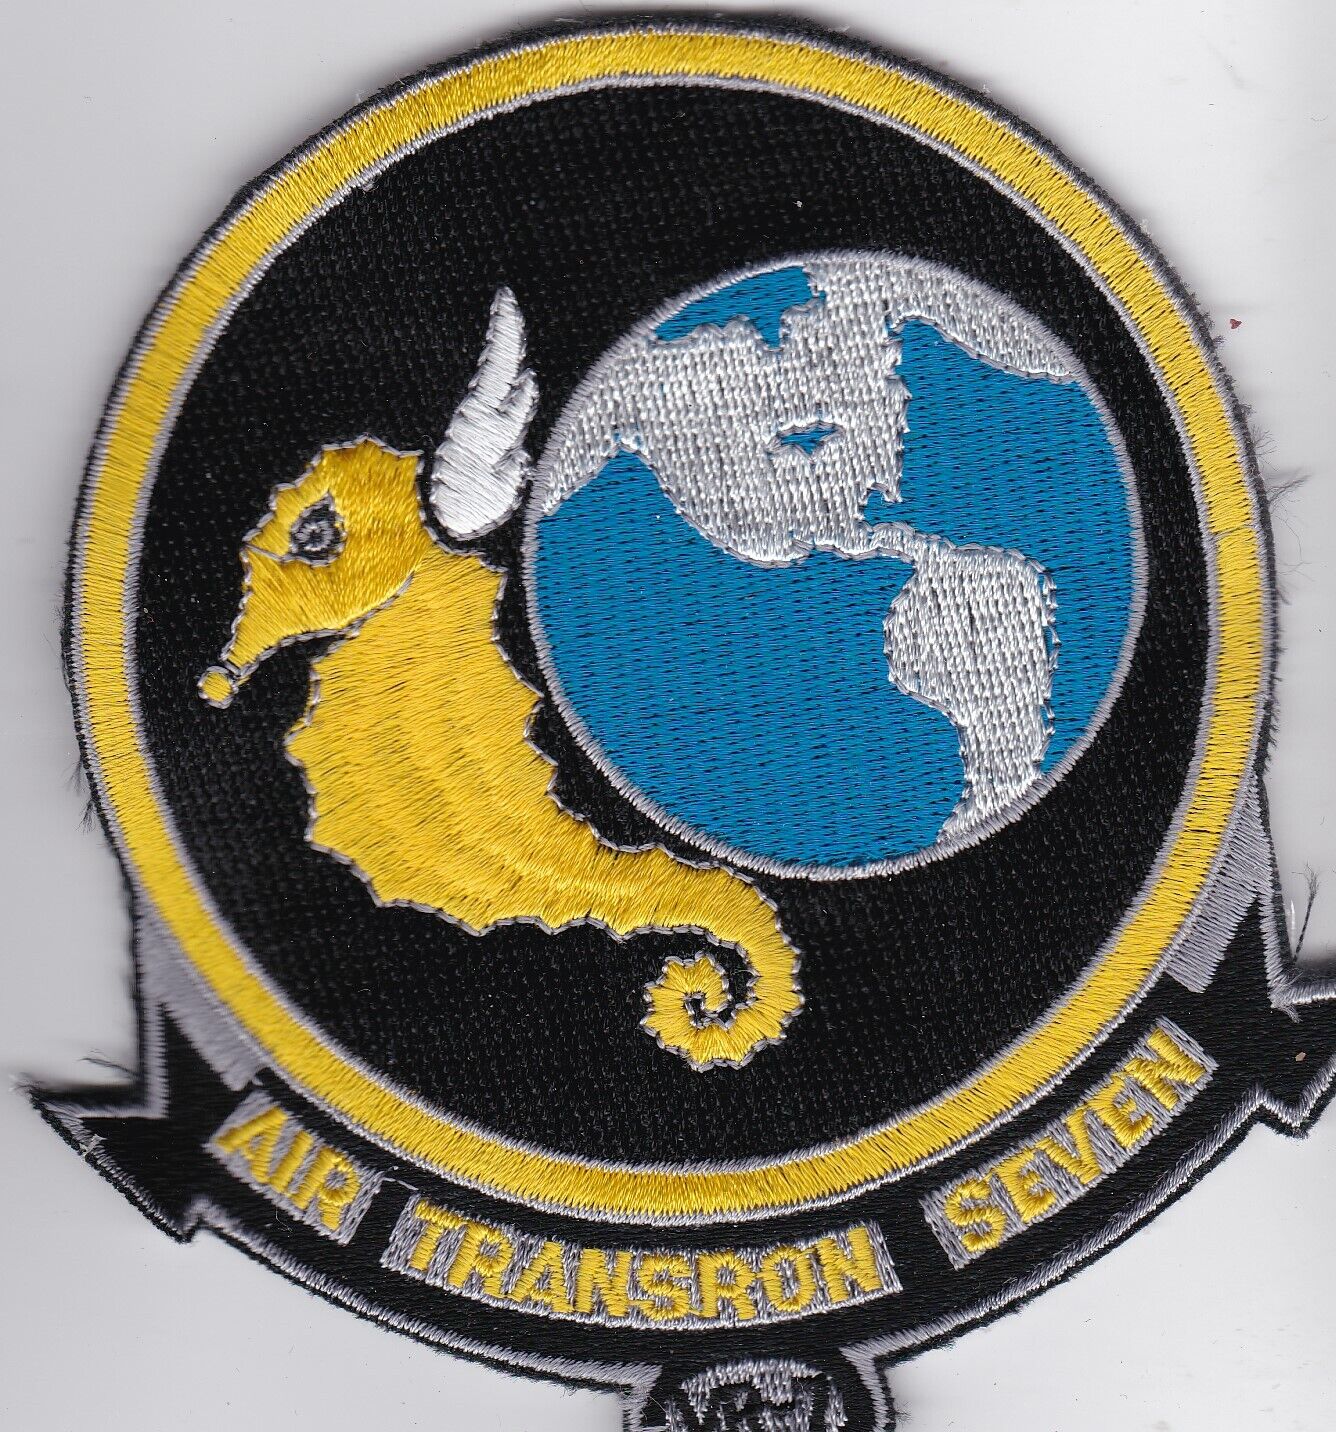 USN navy air force AIRTRANSRON 7   VR-7 patch